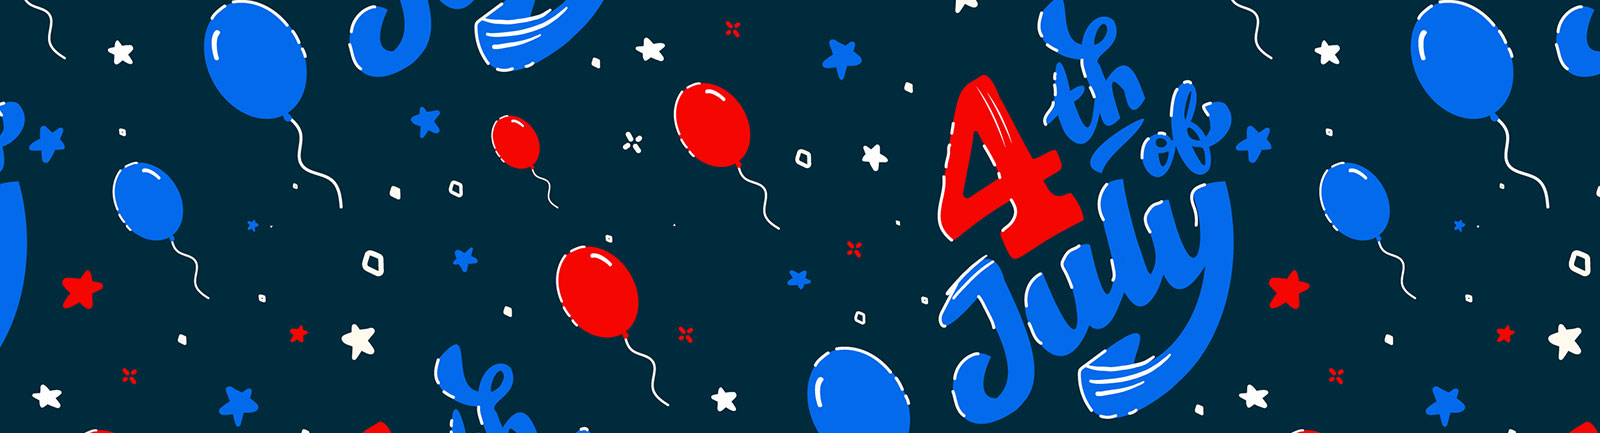 12 Merch and T-Shirt Design ideas for the 4th of July